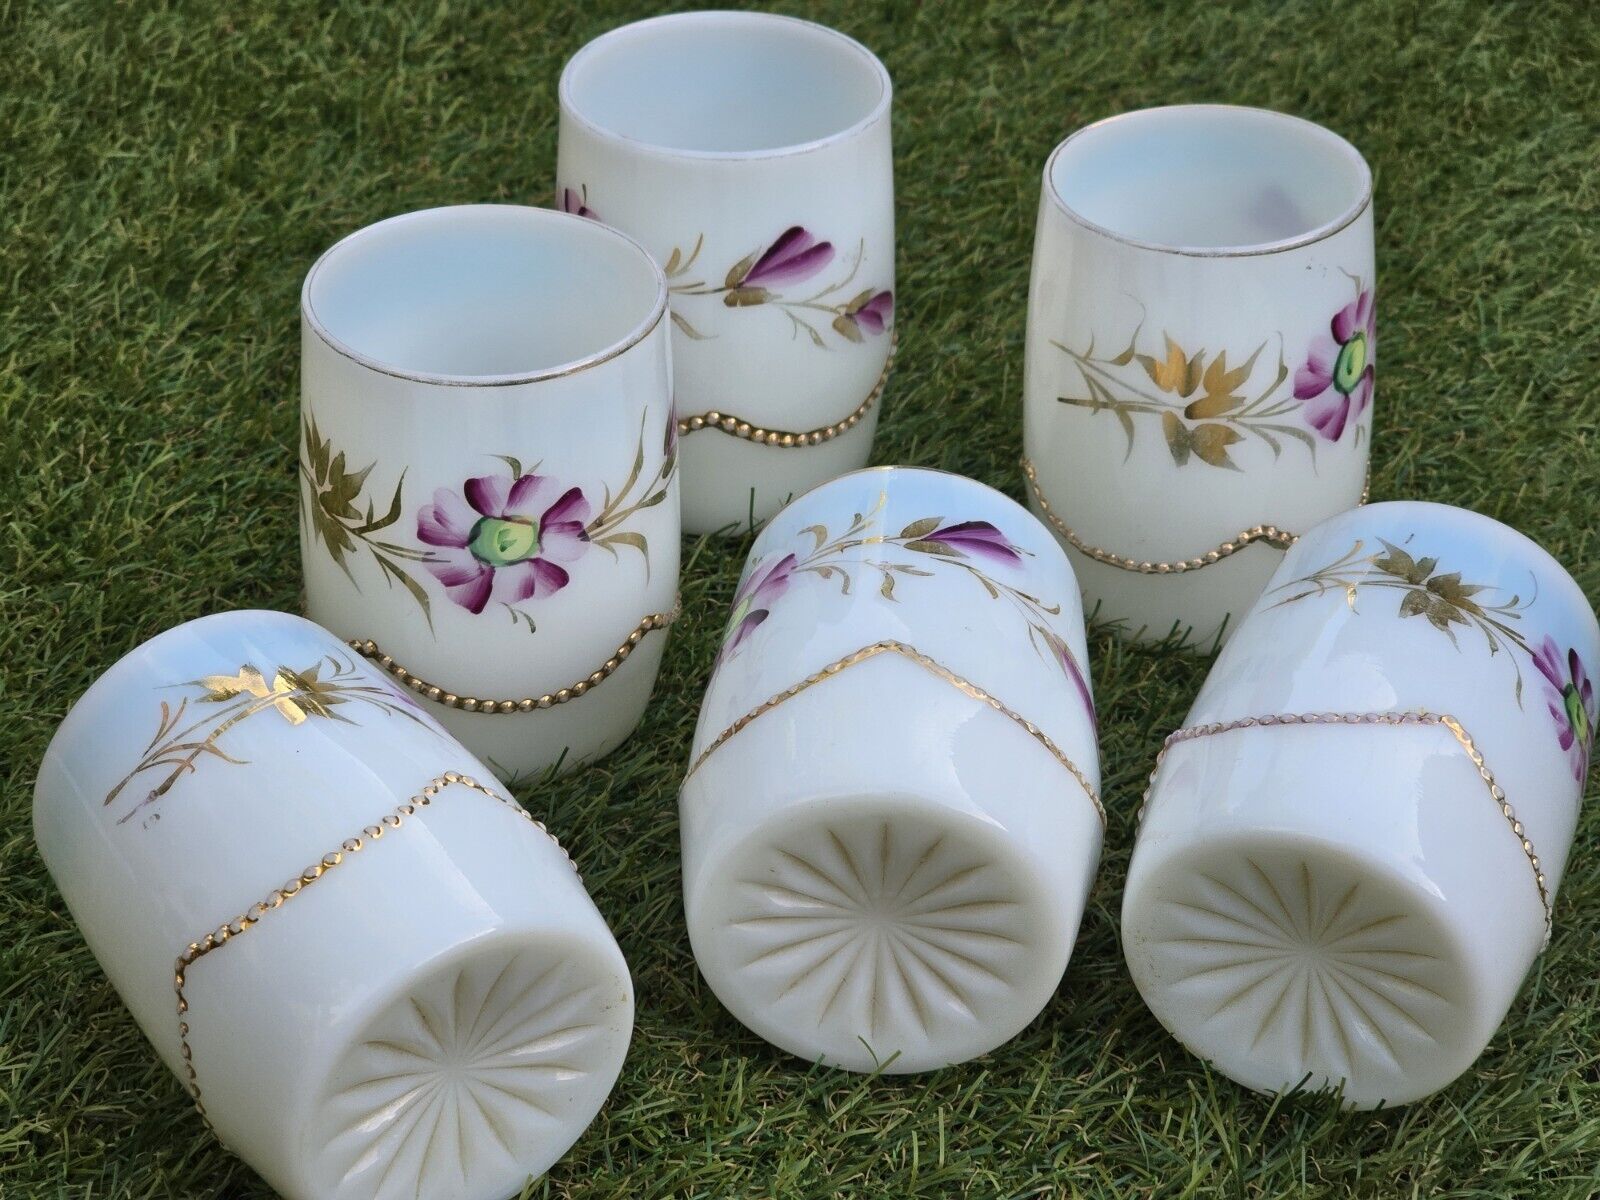 Heisey Beaded Swag 6 Set MILK GKASS Cups w/ Painted Daisy, Leaves, & Gold Rim